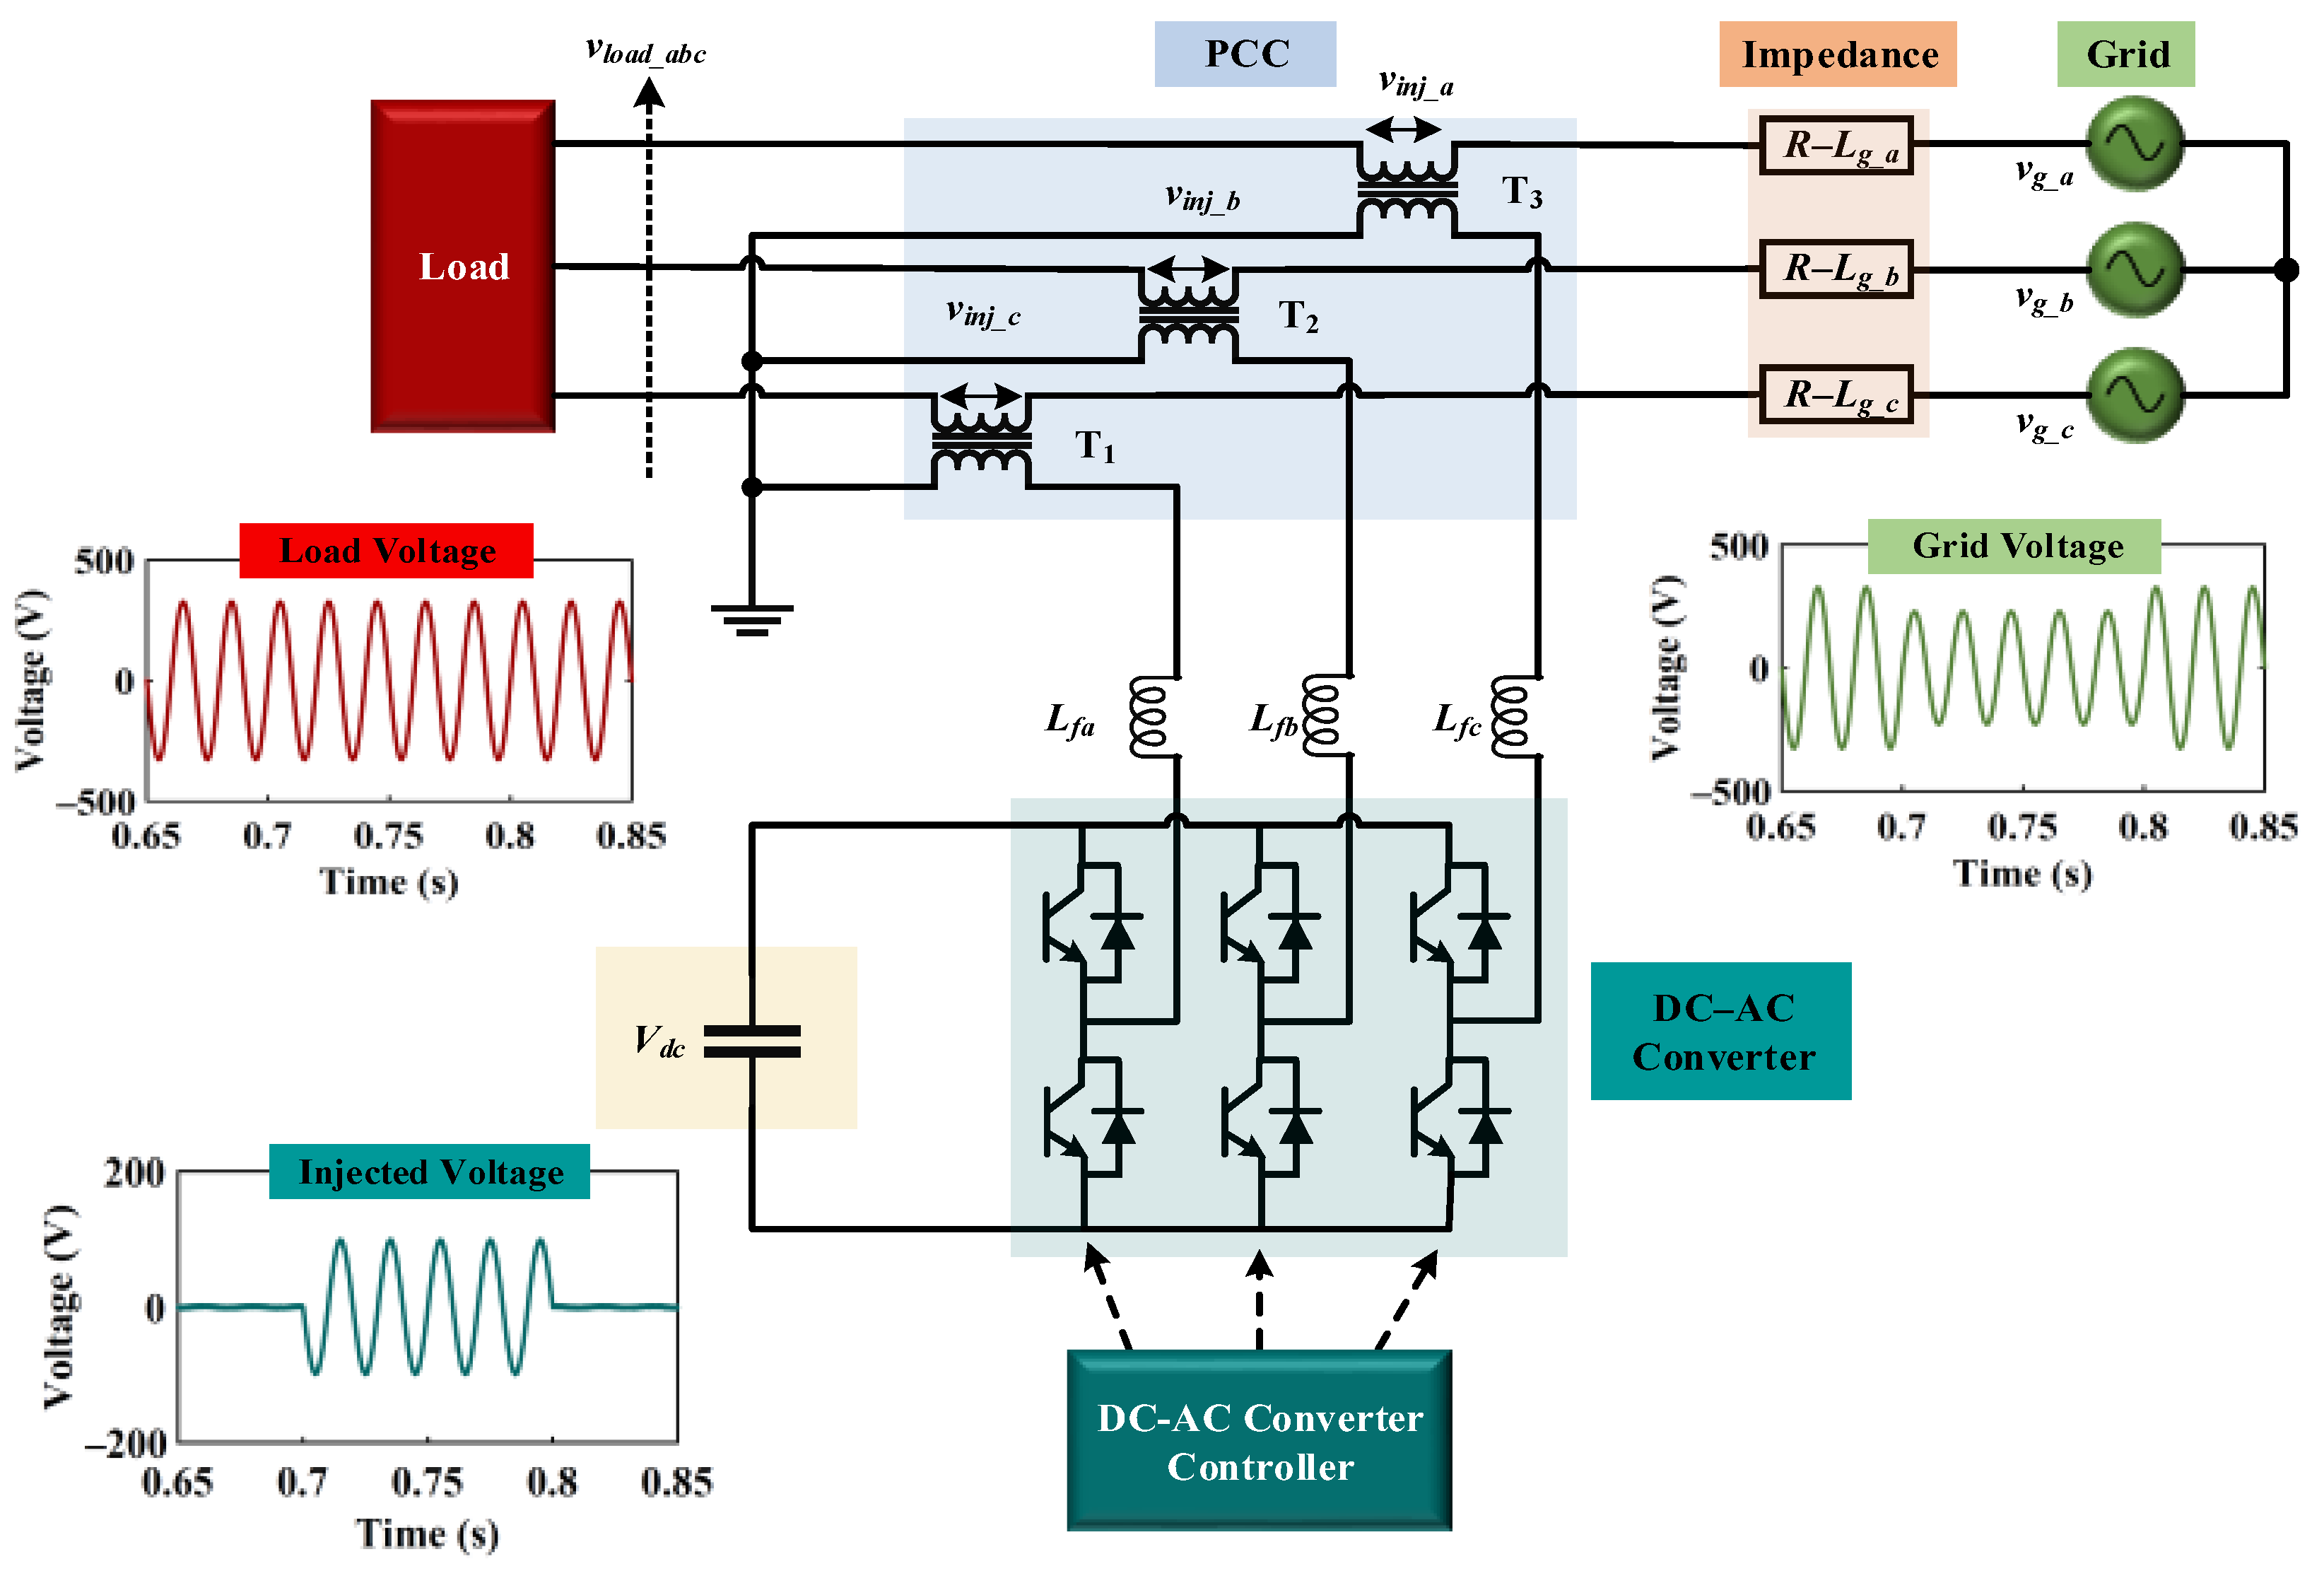 Electronics | Free Full-Text | DC-AC Converter with Dynamic Voltage  Restoring Ability Based on Self-Regulated Phase Estimator-DQ Algorithm:  Practical Modeling and Performance Evaluation